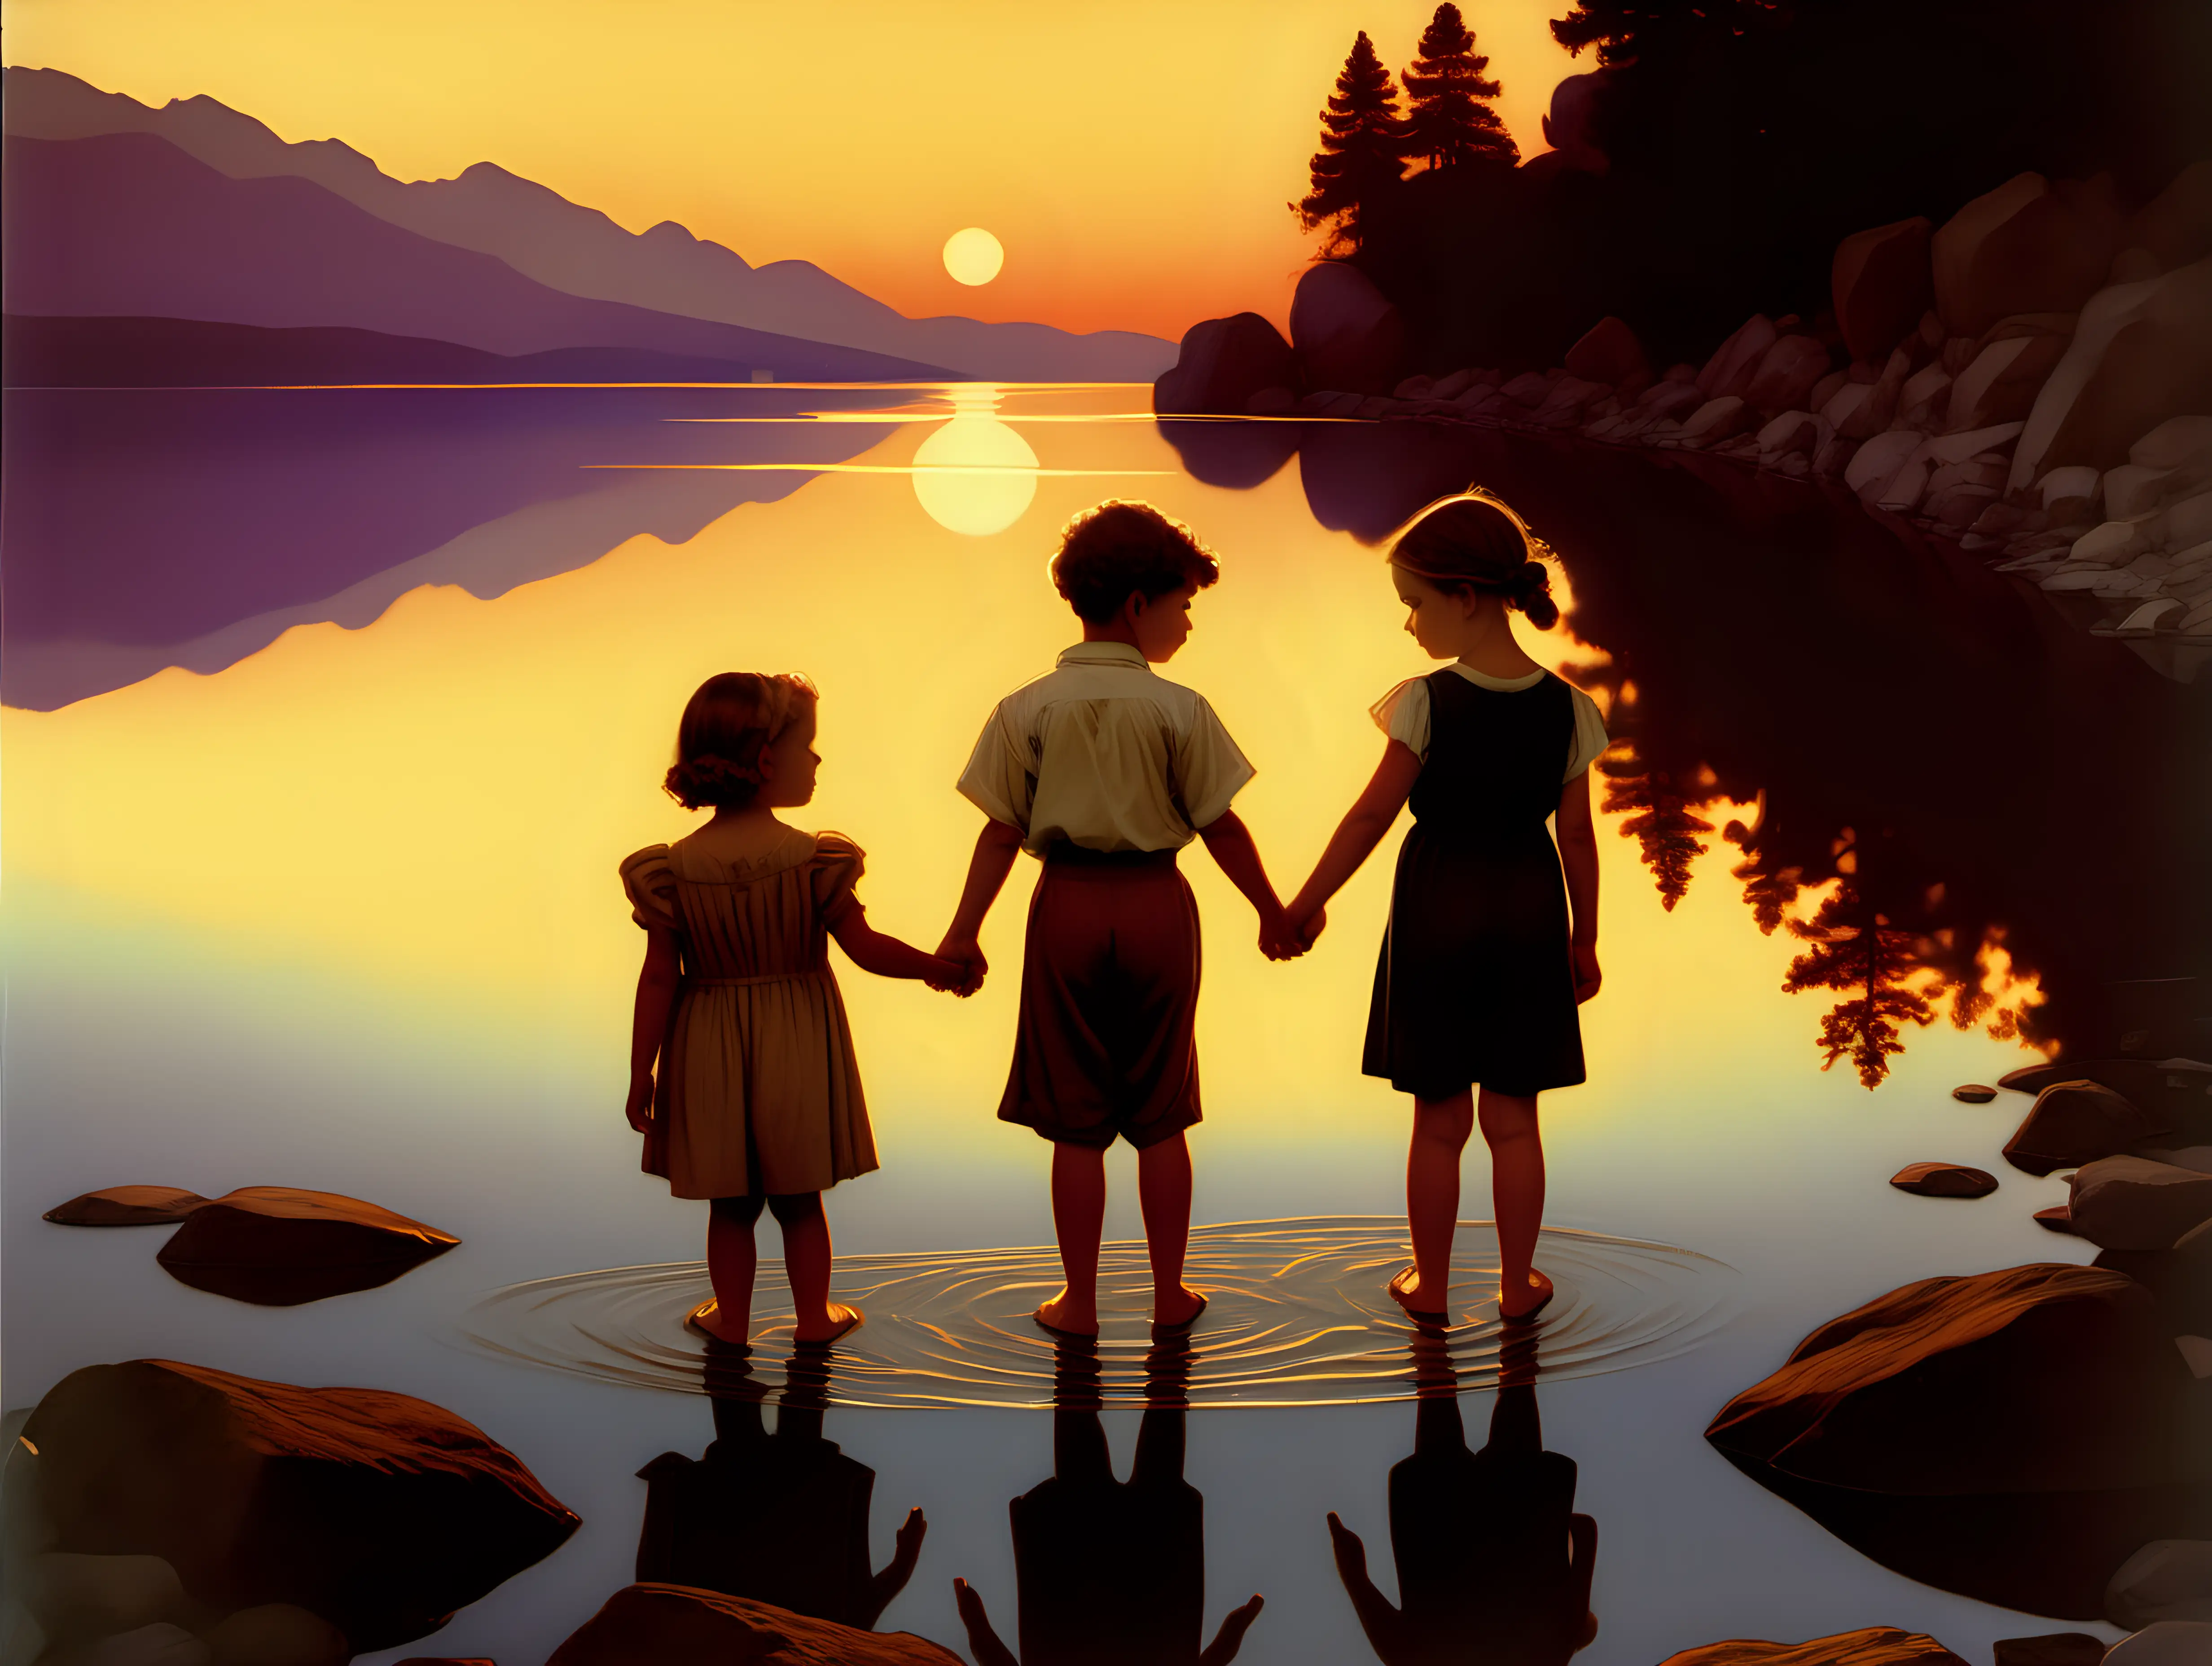 Charming Sunset Stroll Little Boy and Girl Holding Hands by the Water